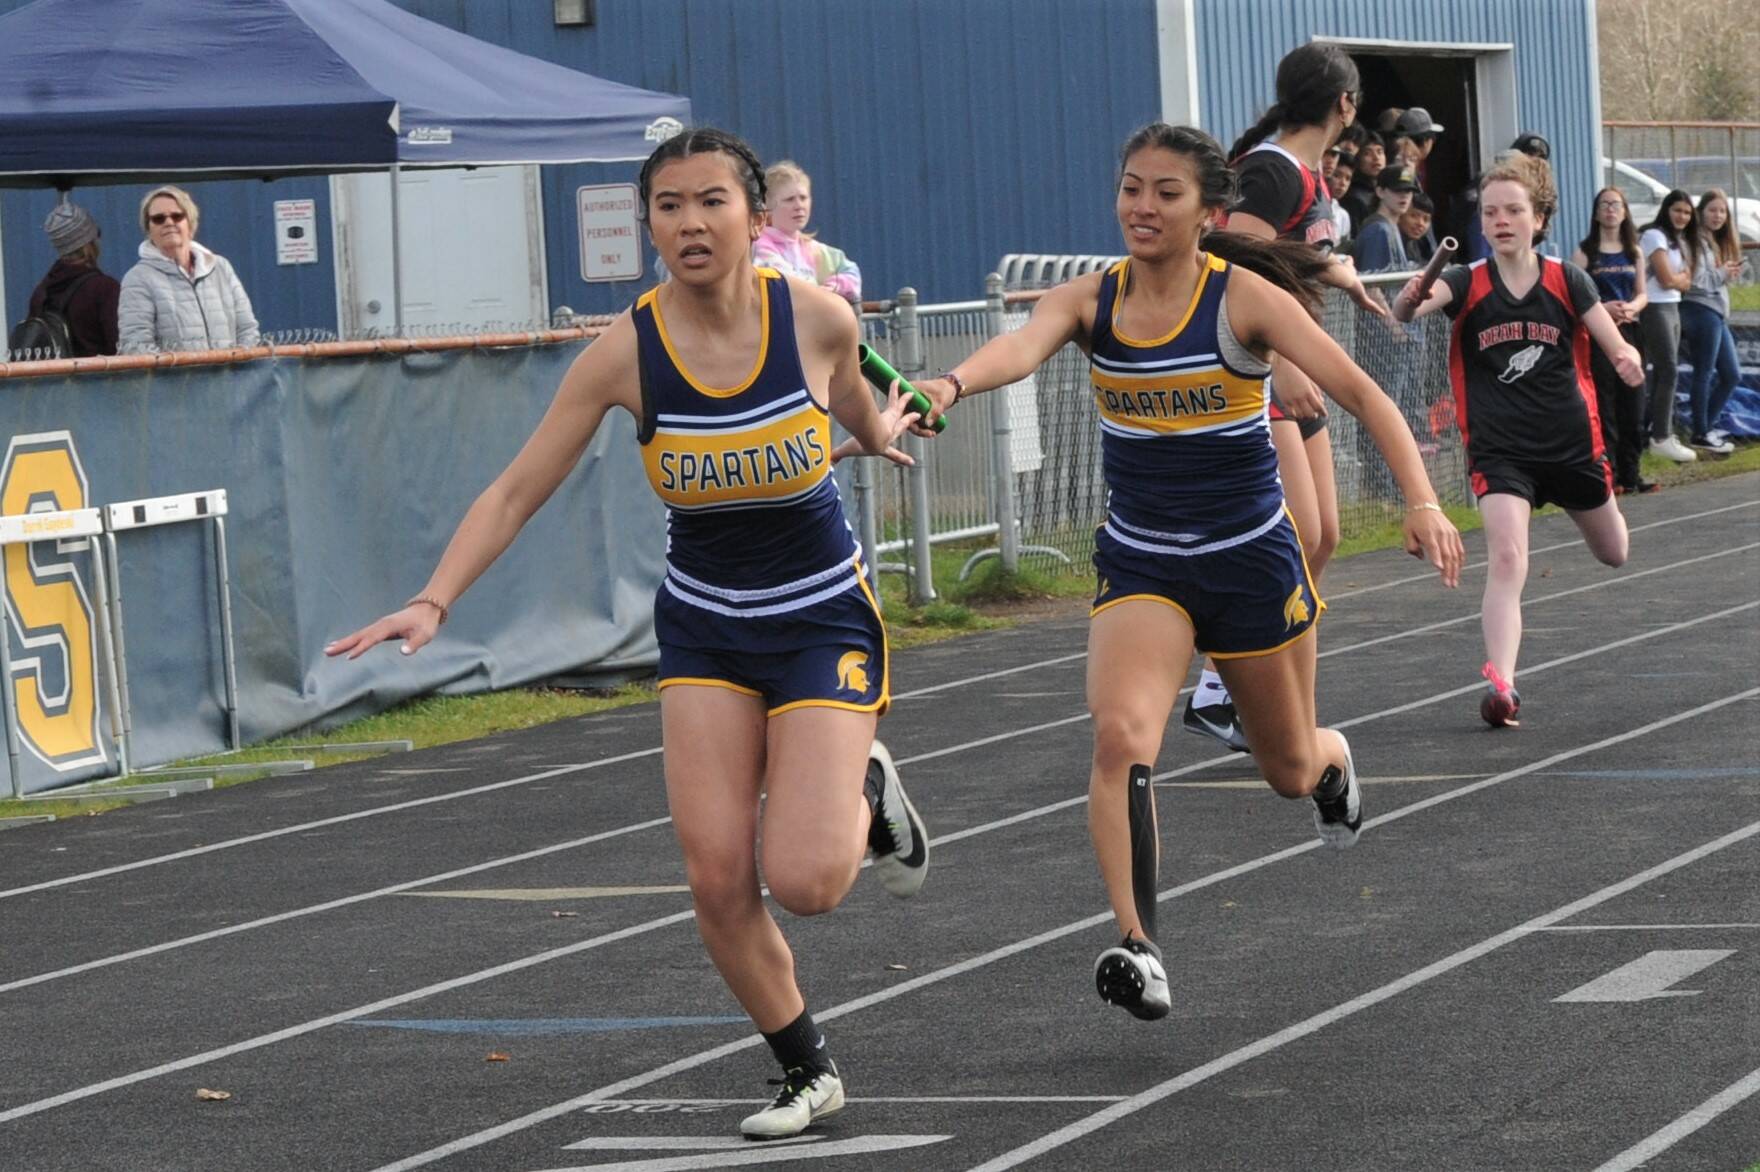 Myra Loung receives the baton from Leslie Beltran in the 4 x 2 relay. Photo by Lonnie Archibald